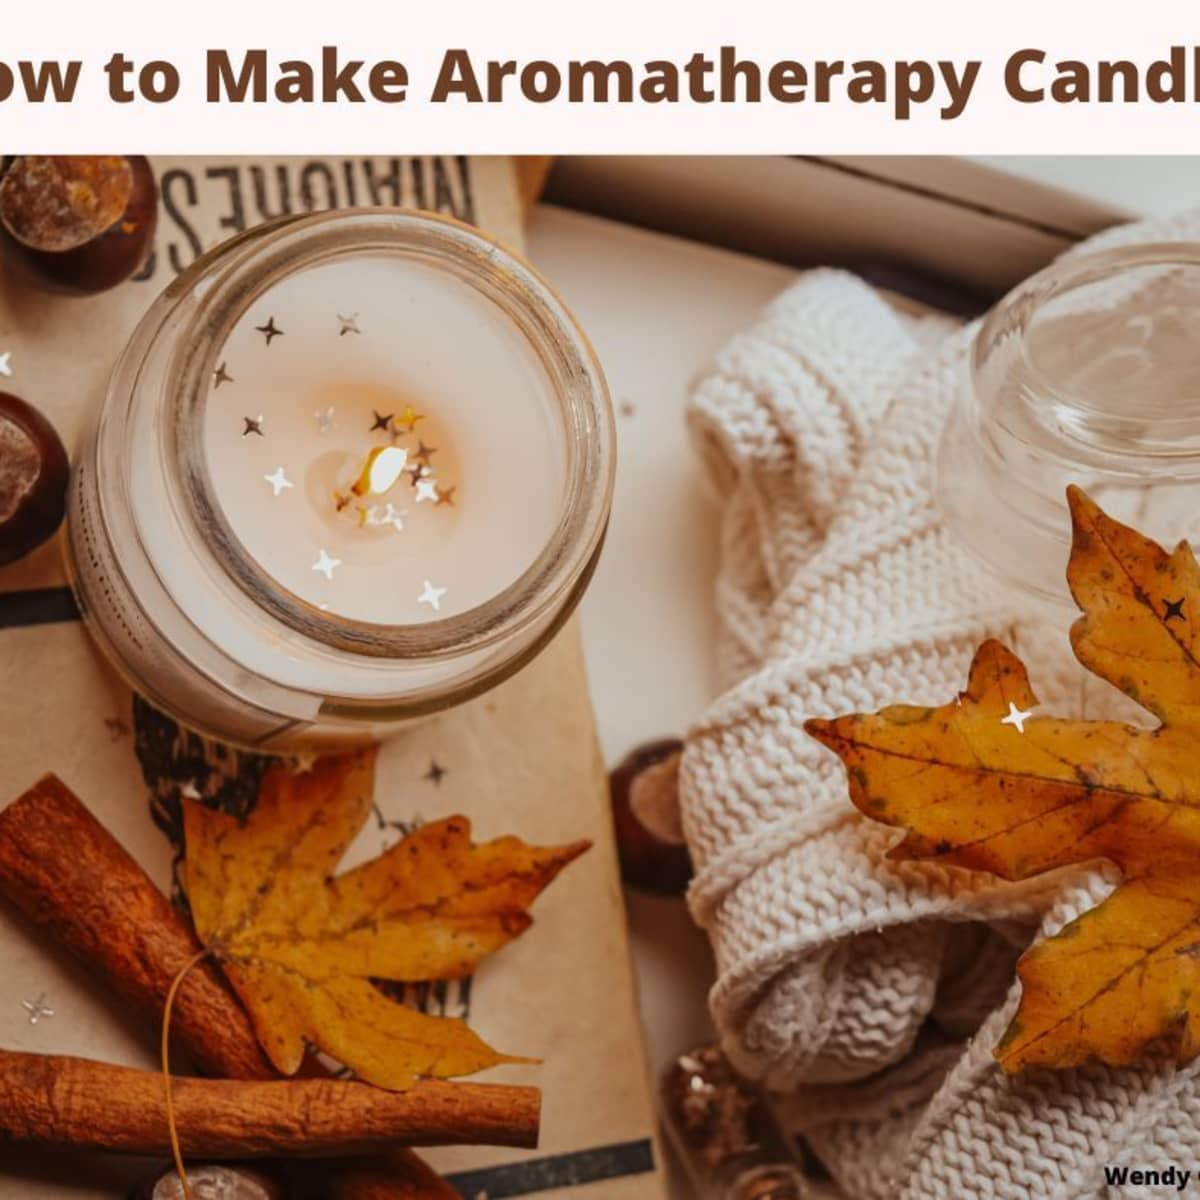 How to Make Candles at Home [w/ Essential Oils] - The Healthy Maven